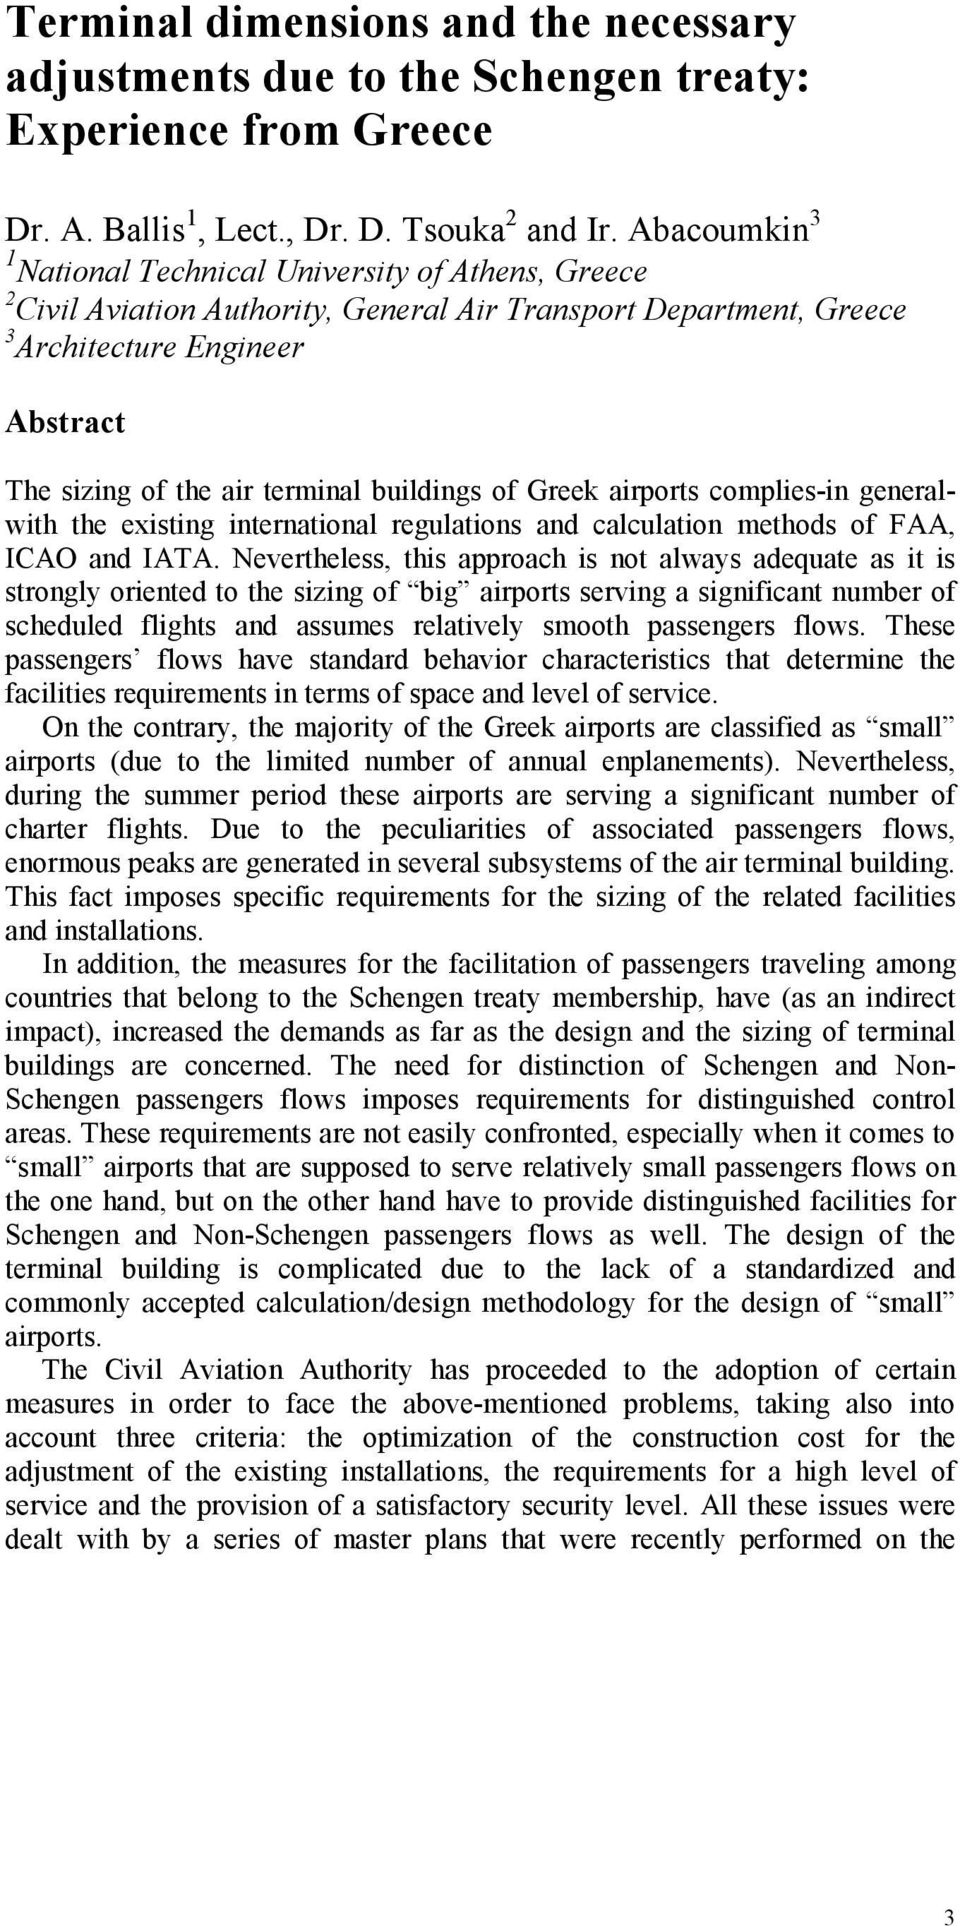 buildings of Greek airports complies-in generalwith the existing international regulations and calculation methods of FAA, ICAO and IATA.